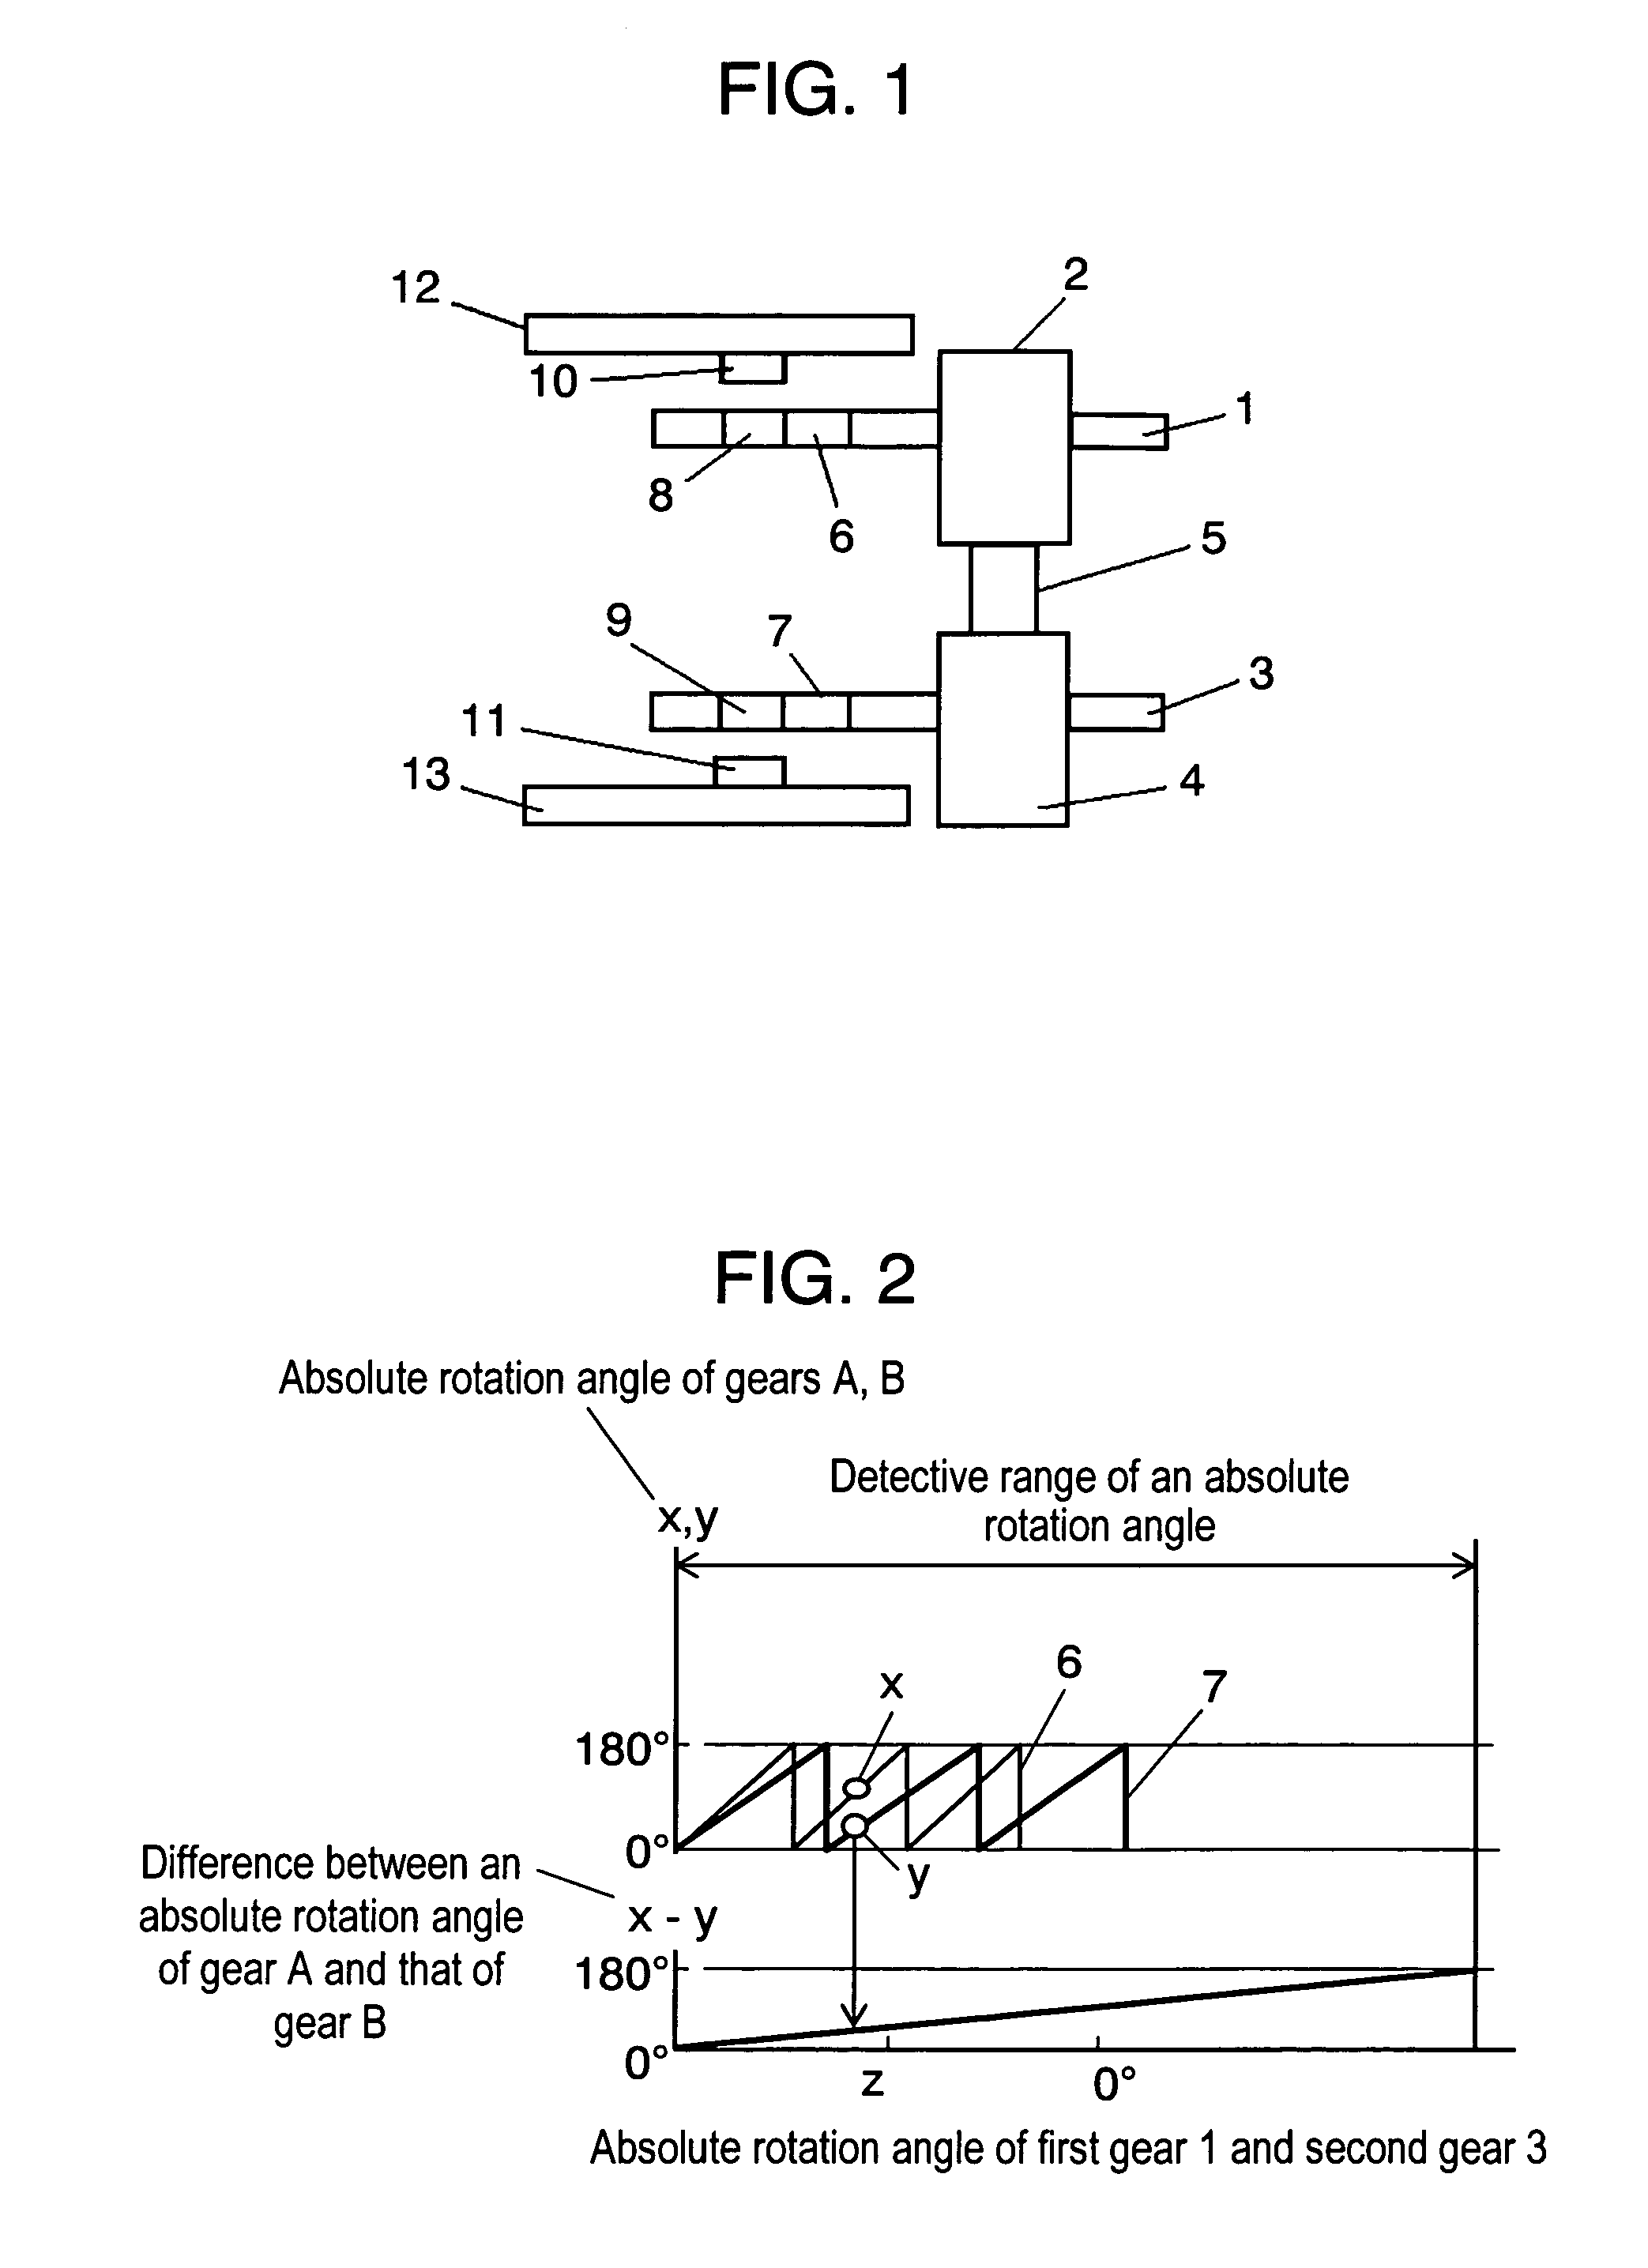 Device for detecting absolute rotation angle and torque